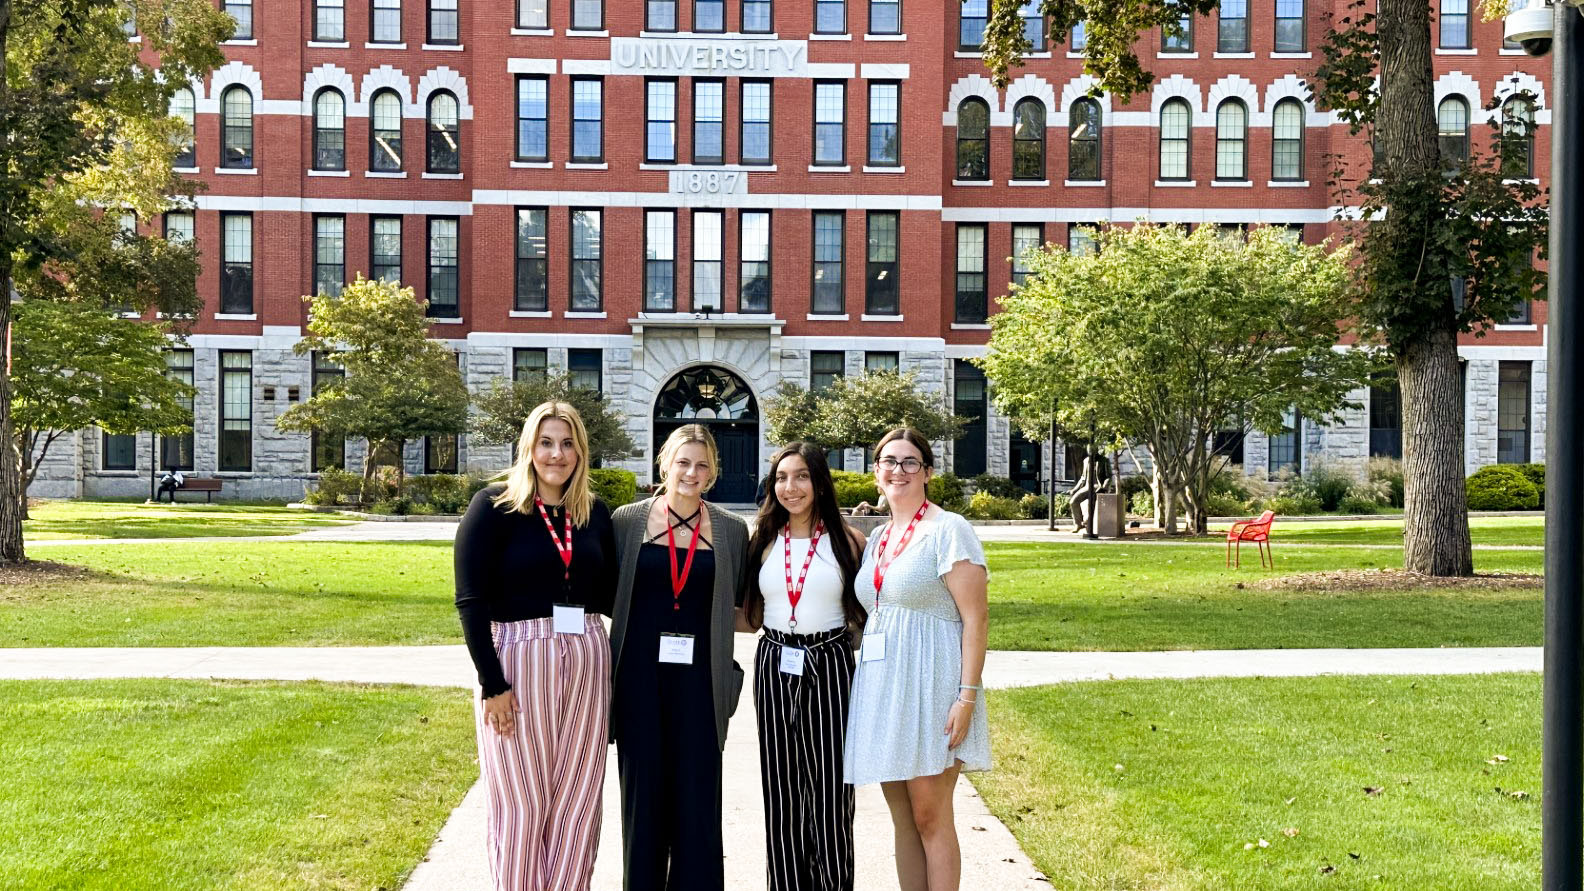 Four young women stand in front of a building that reads "Clark University" They are smiling at the camera and are all wearing bright red lanyards.